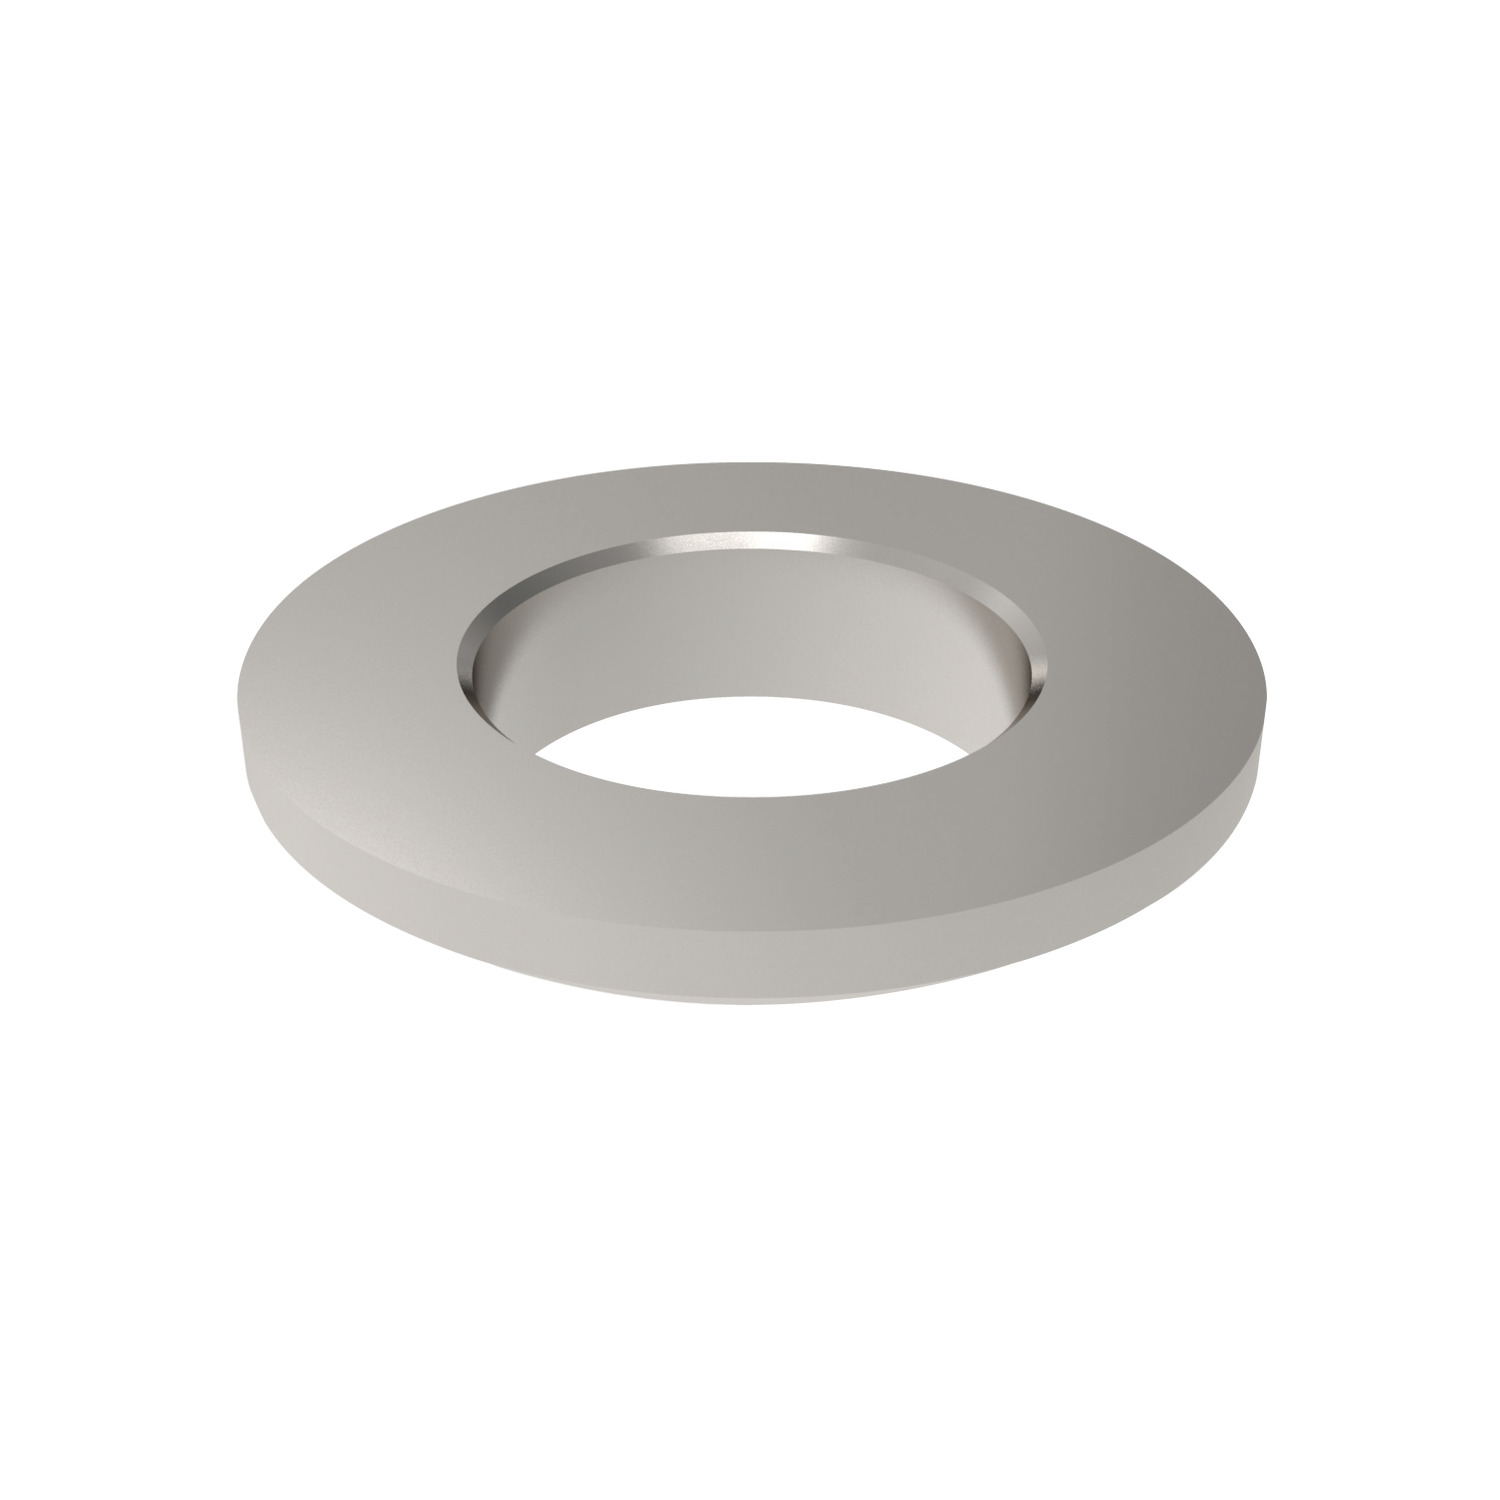 Washers - Spherical Seat Type C spherical seat washers in stainless used in conjunction with FP0353 and FP0335 dished washers dependant on the application. Made in hardened steel to DIN 6319C.